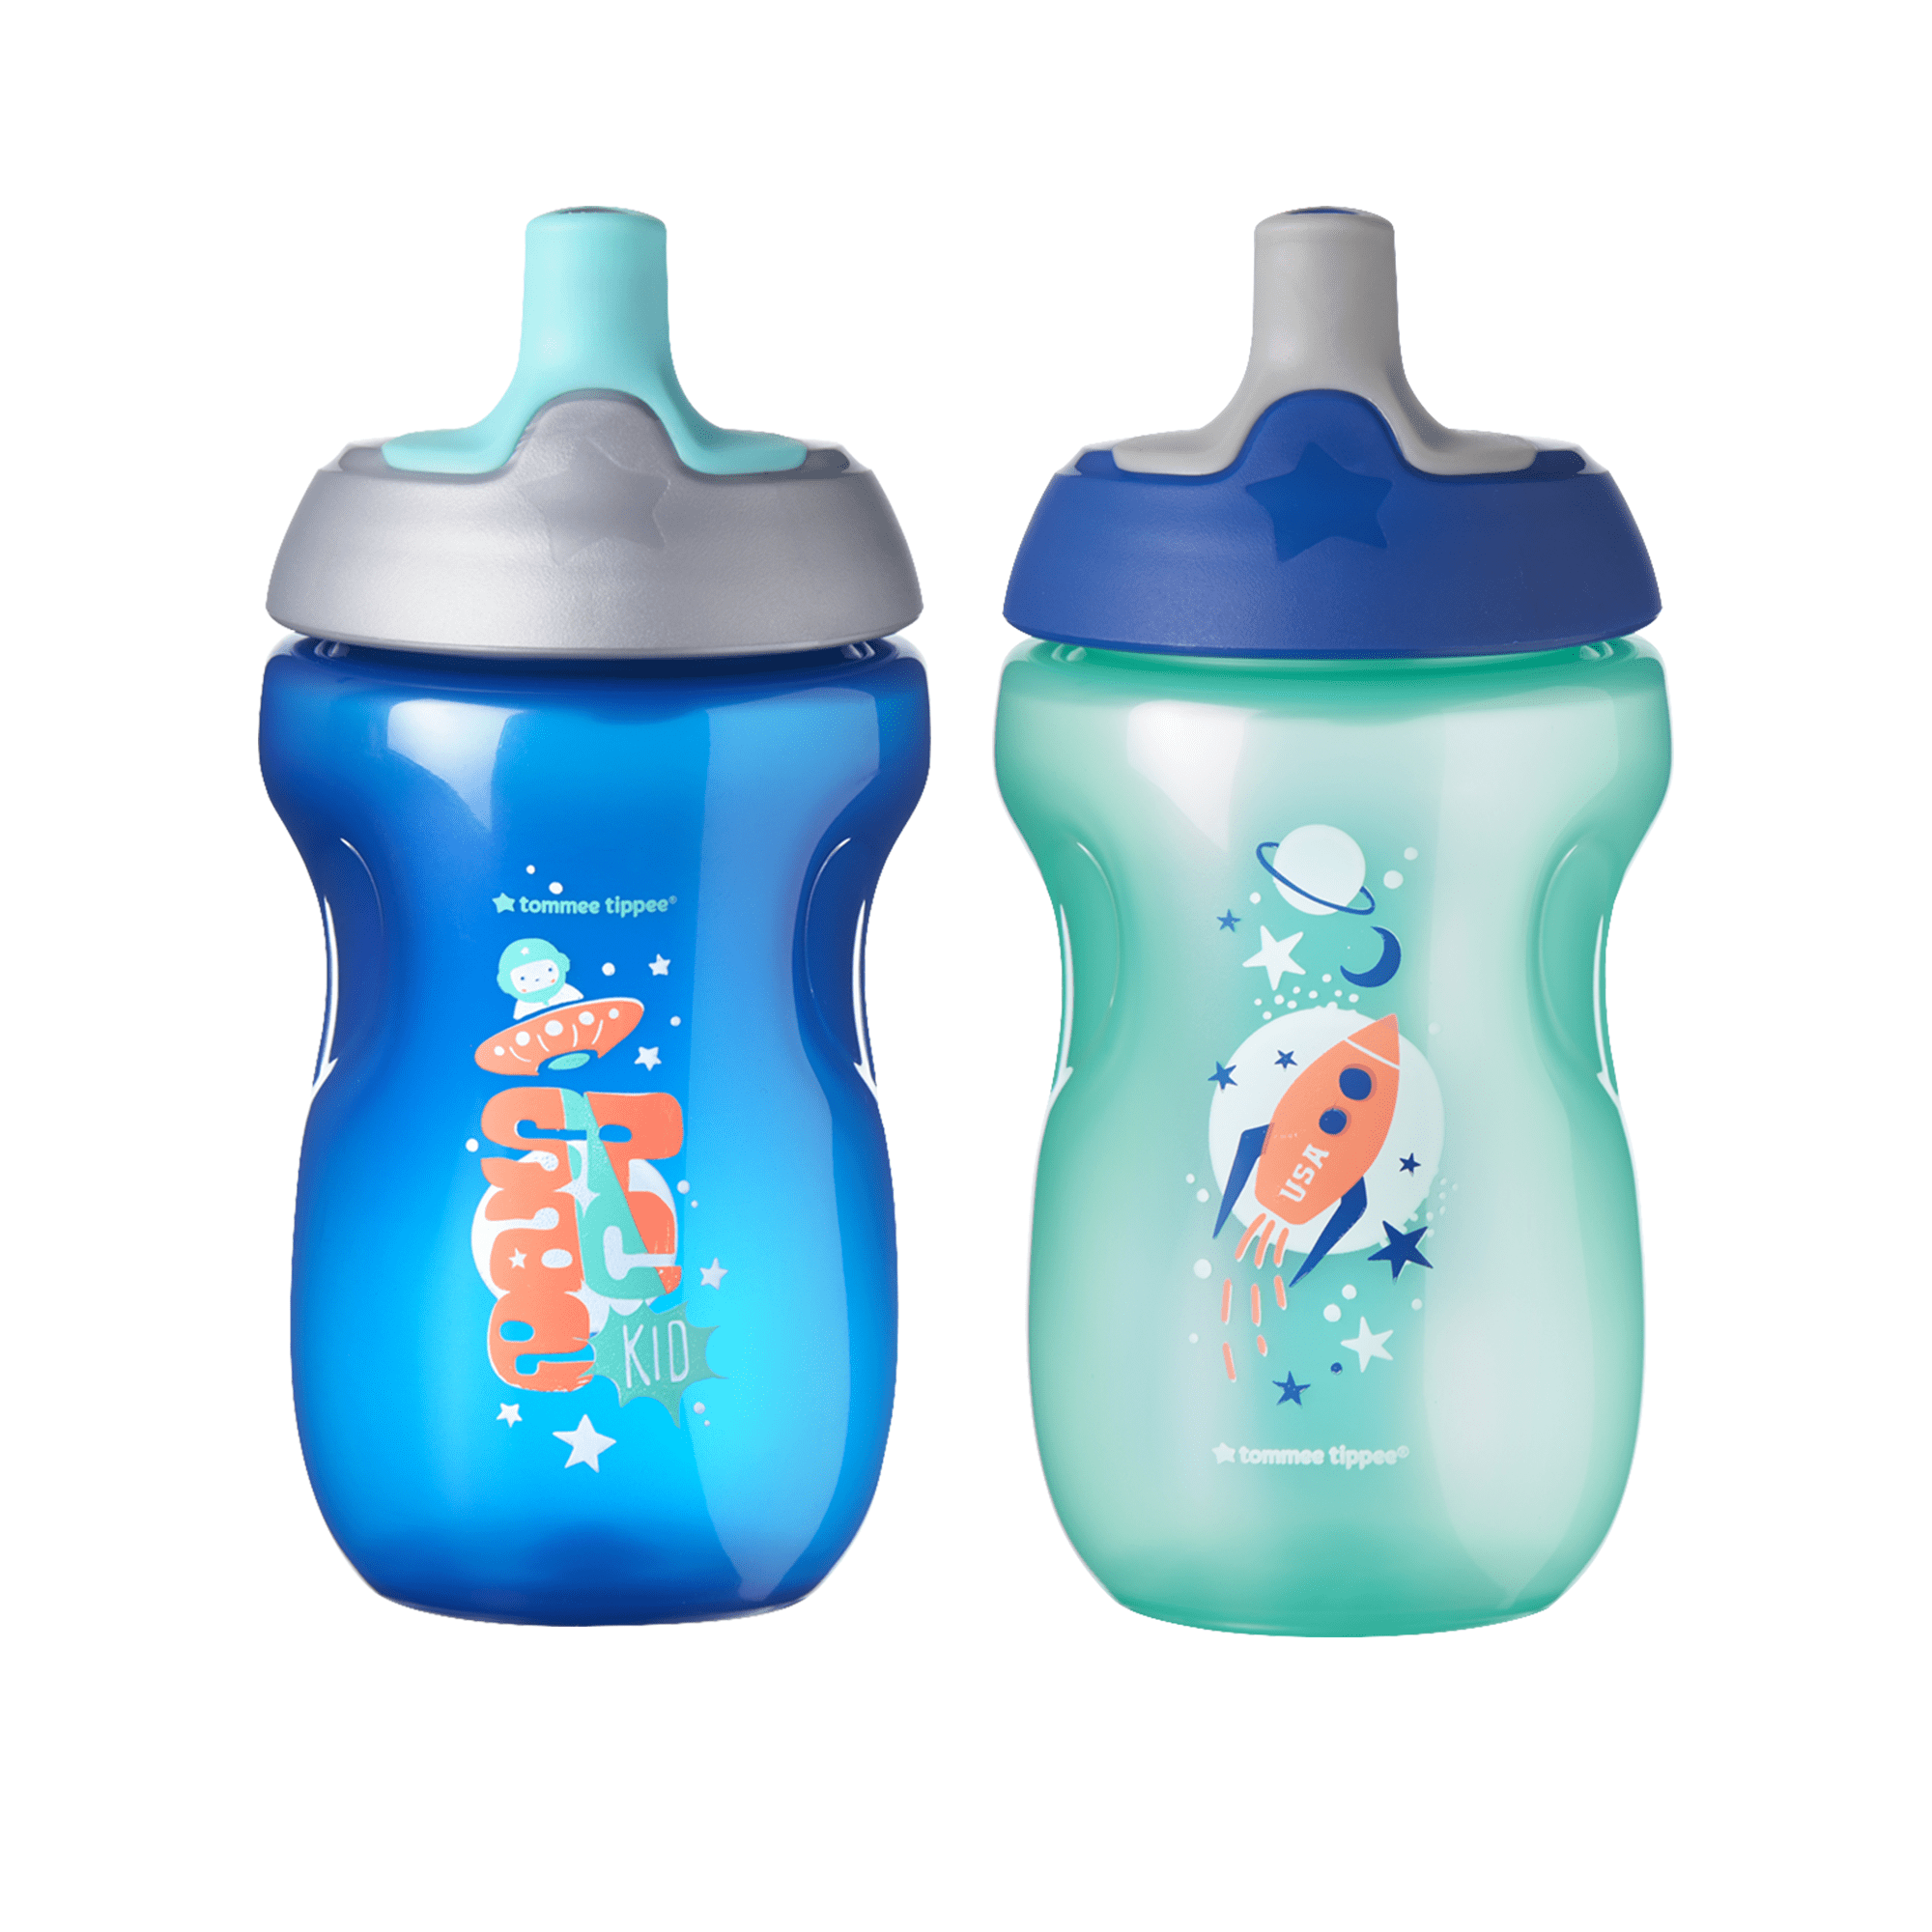 2 Tommee Tippee Toddler Spill Proof Sippy Cup with Handles NEW 